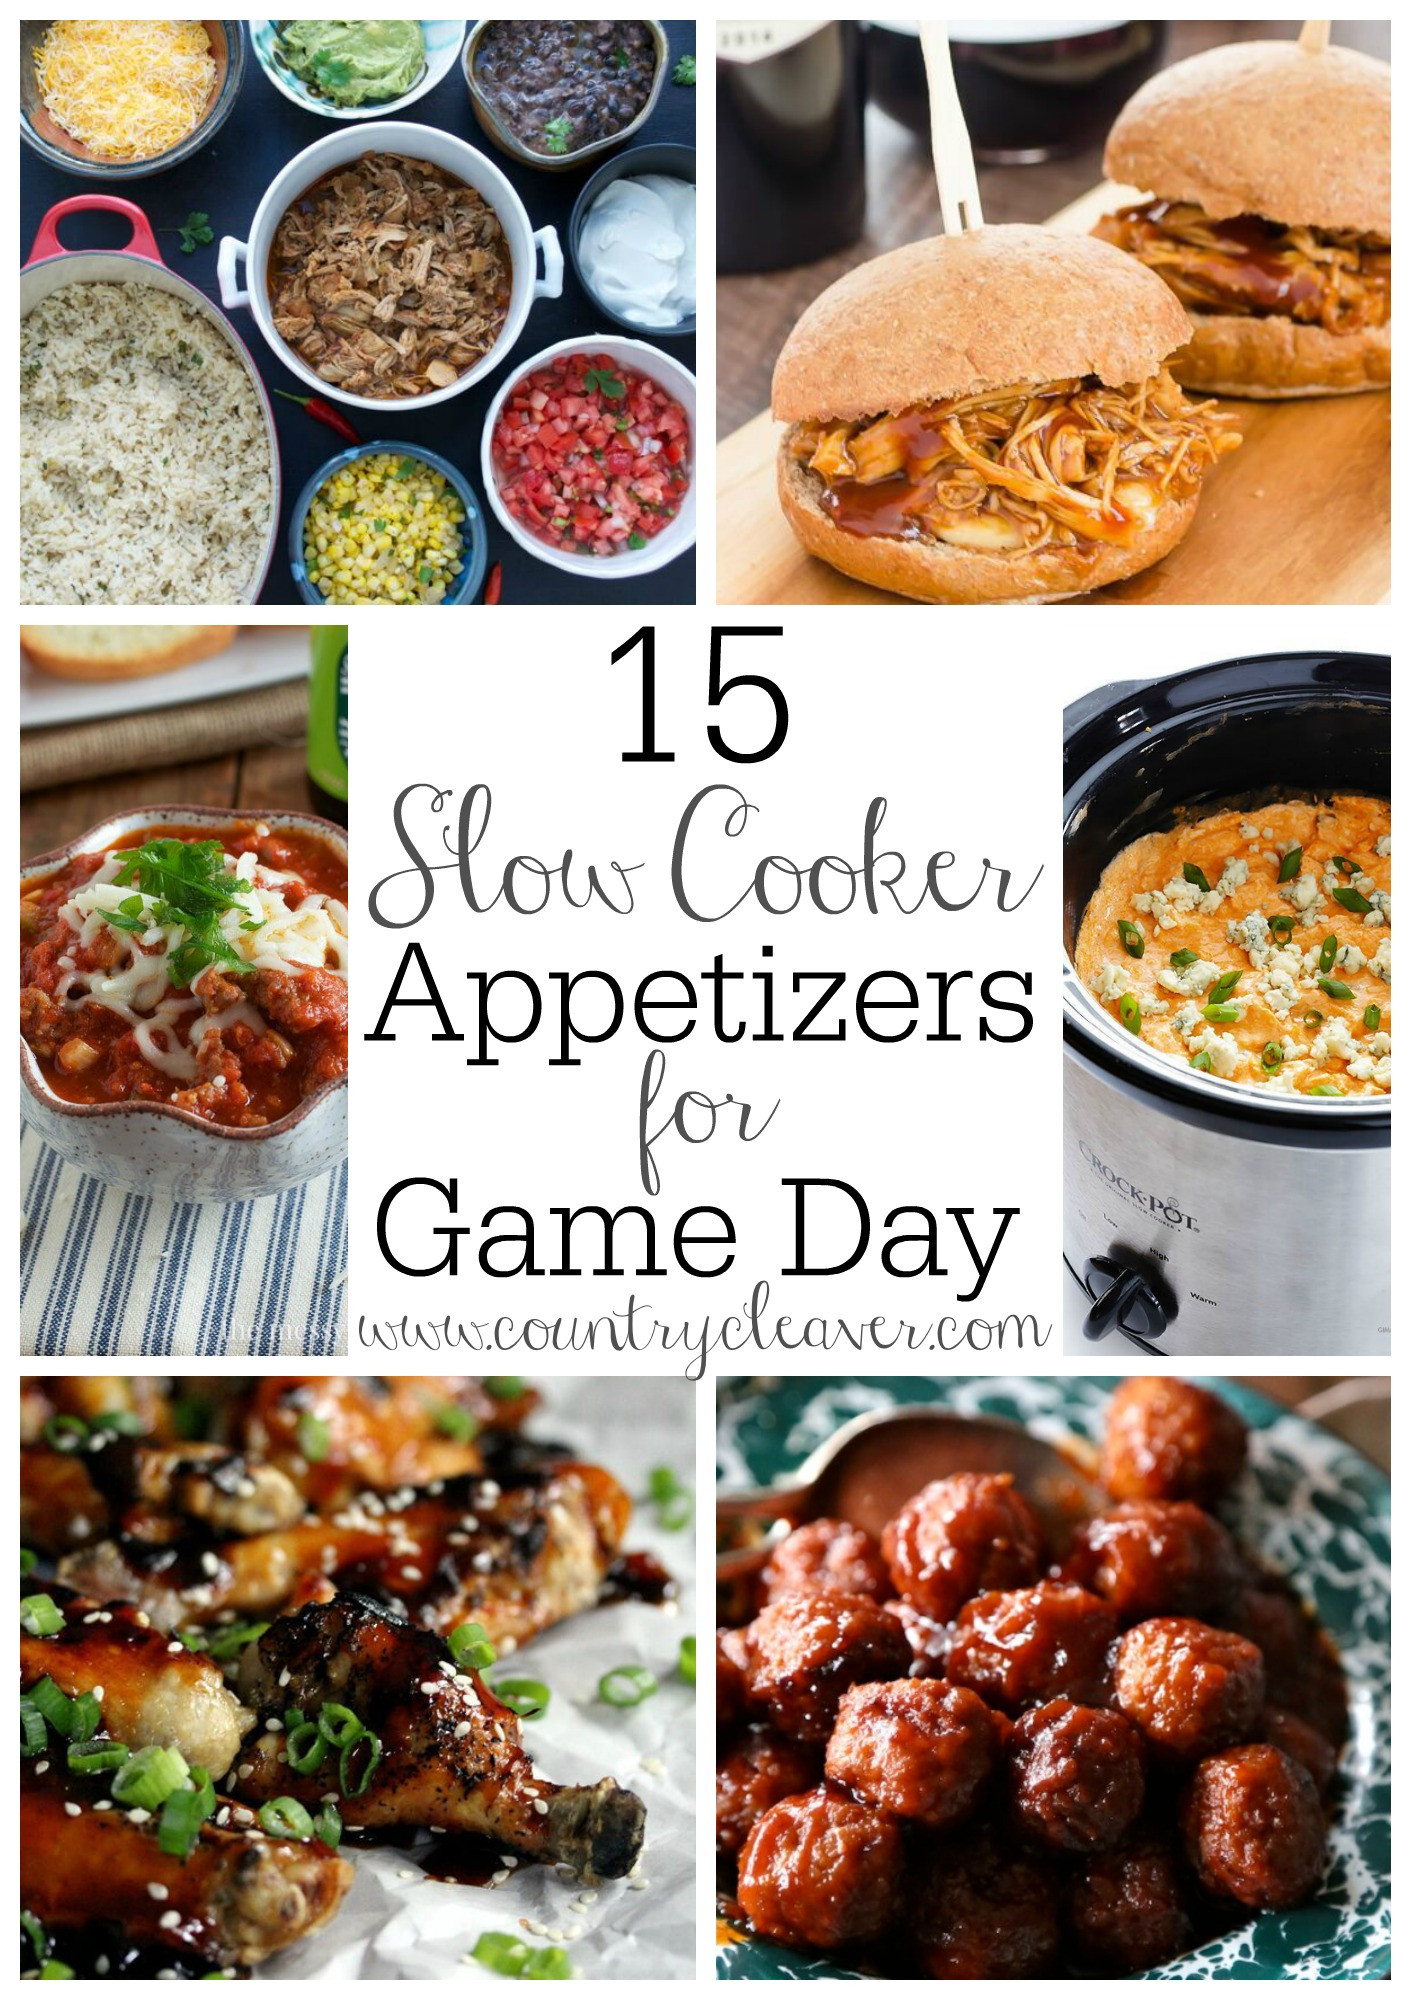 Slow Cooker Appetizers
 15 Slow Cooker Appetizers for Game Day Country Cleaver